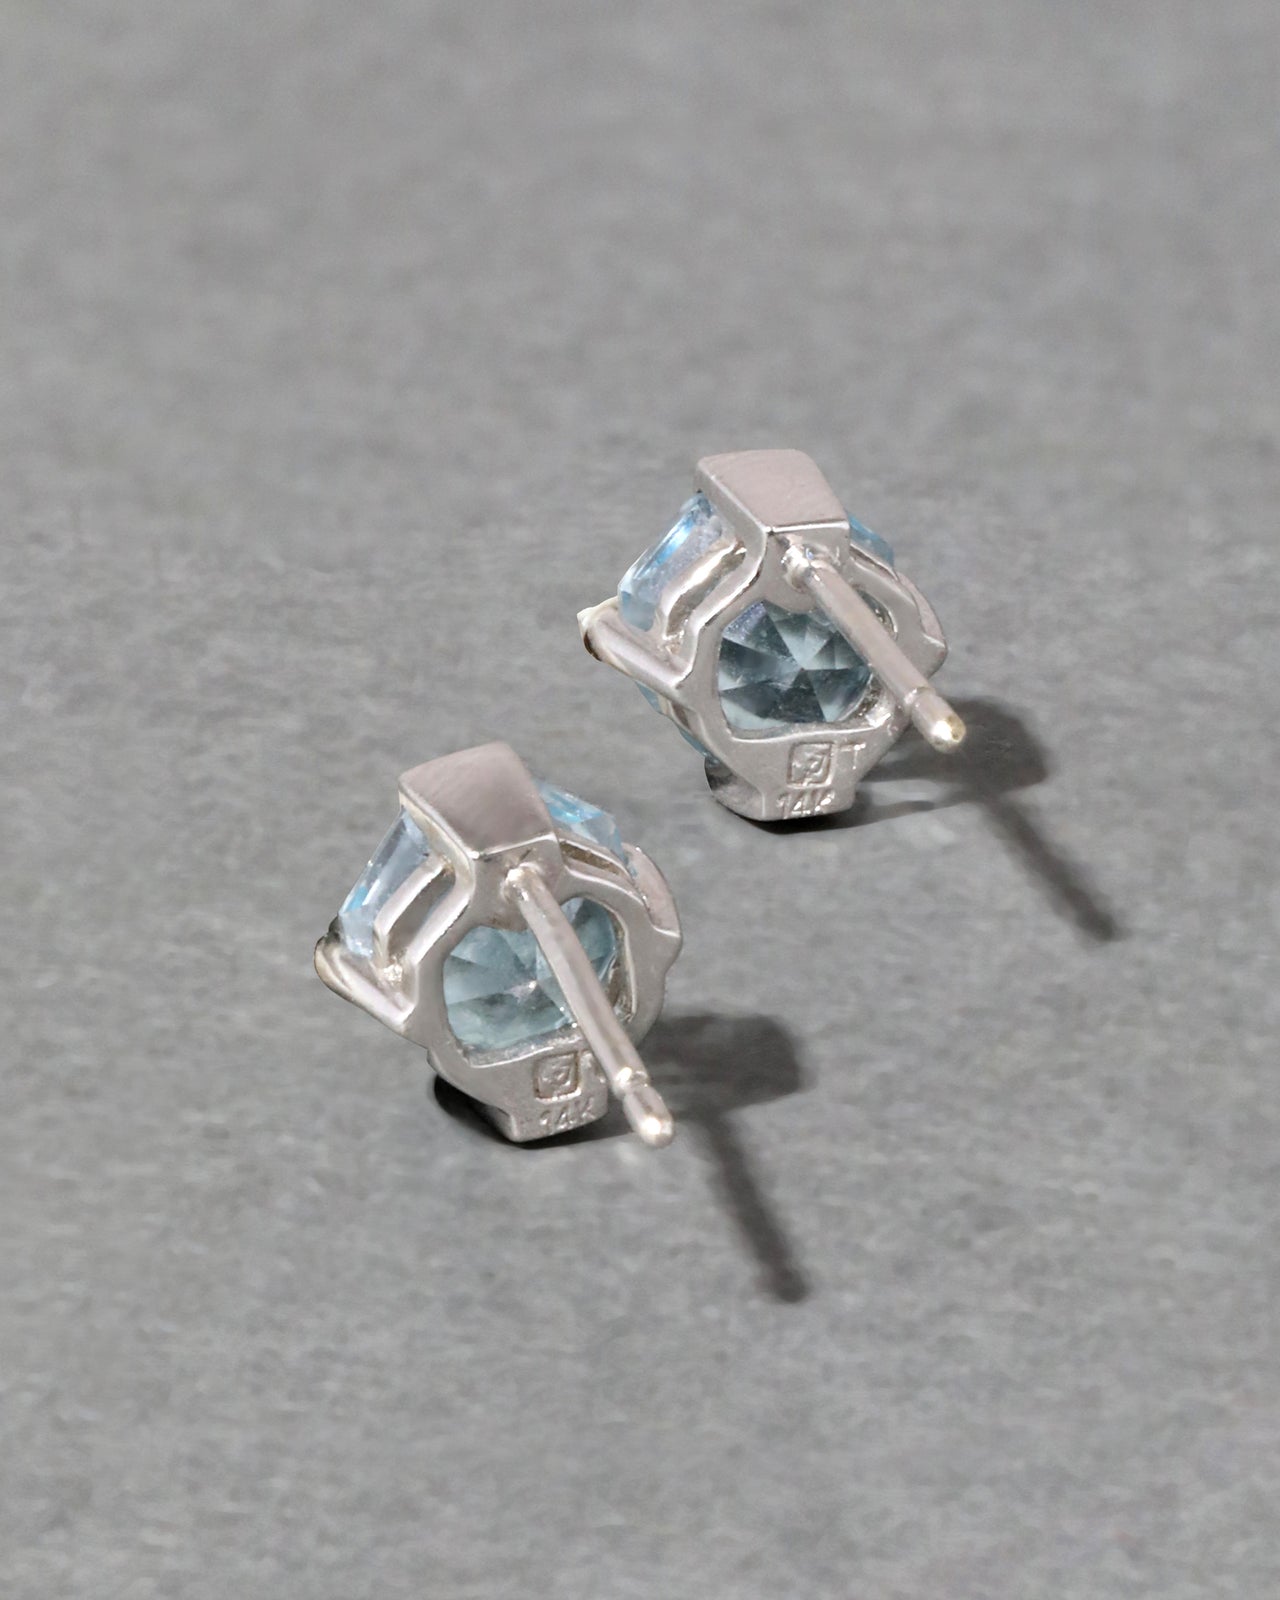 Vintage 1980s 14k White Gold with Blue Topaz Post Earring - Photo 2